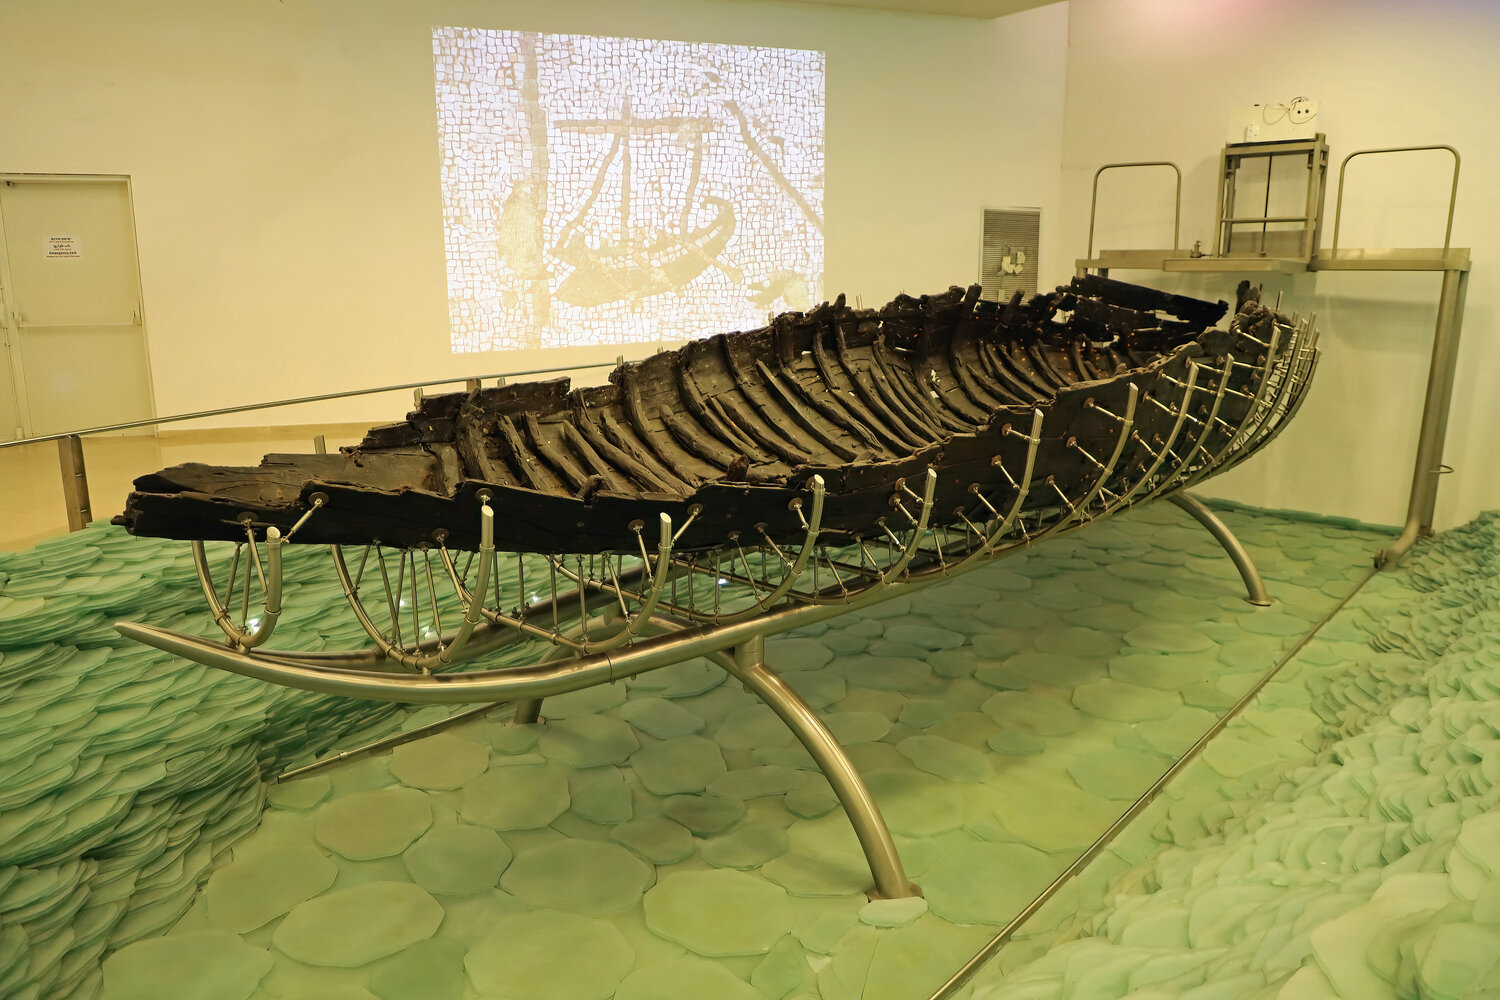 Yigal Allon Galilee Boat Museum in Kibbutz Ginosar which housed the Ancient Galilee Boat